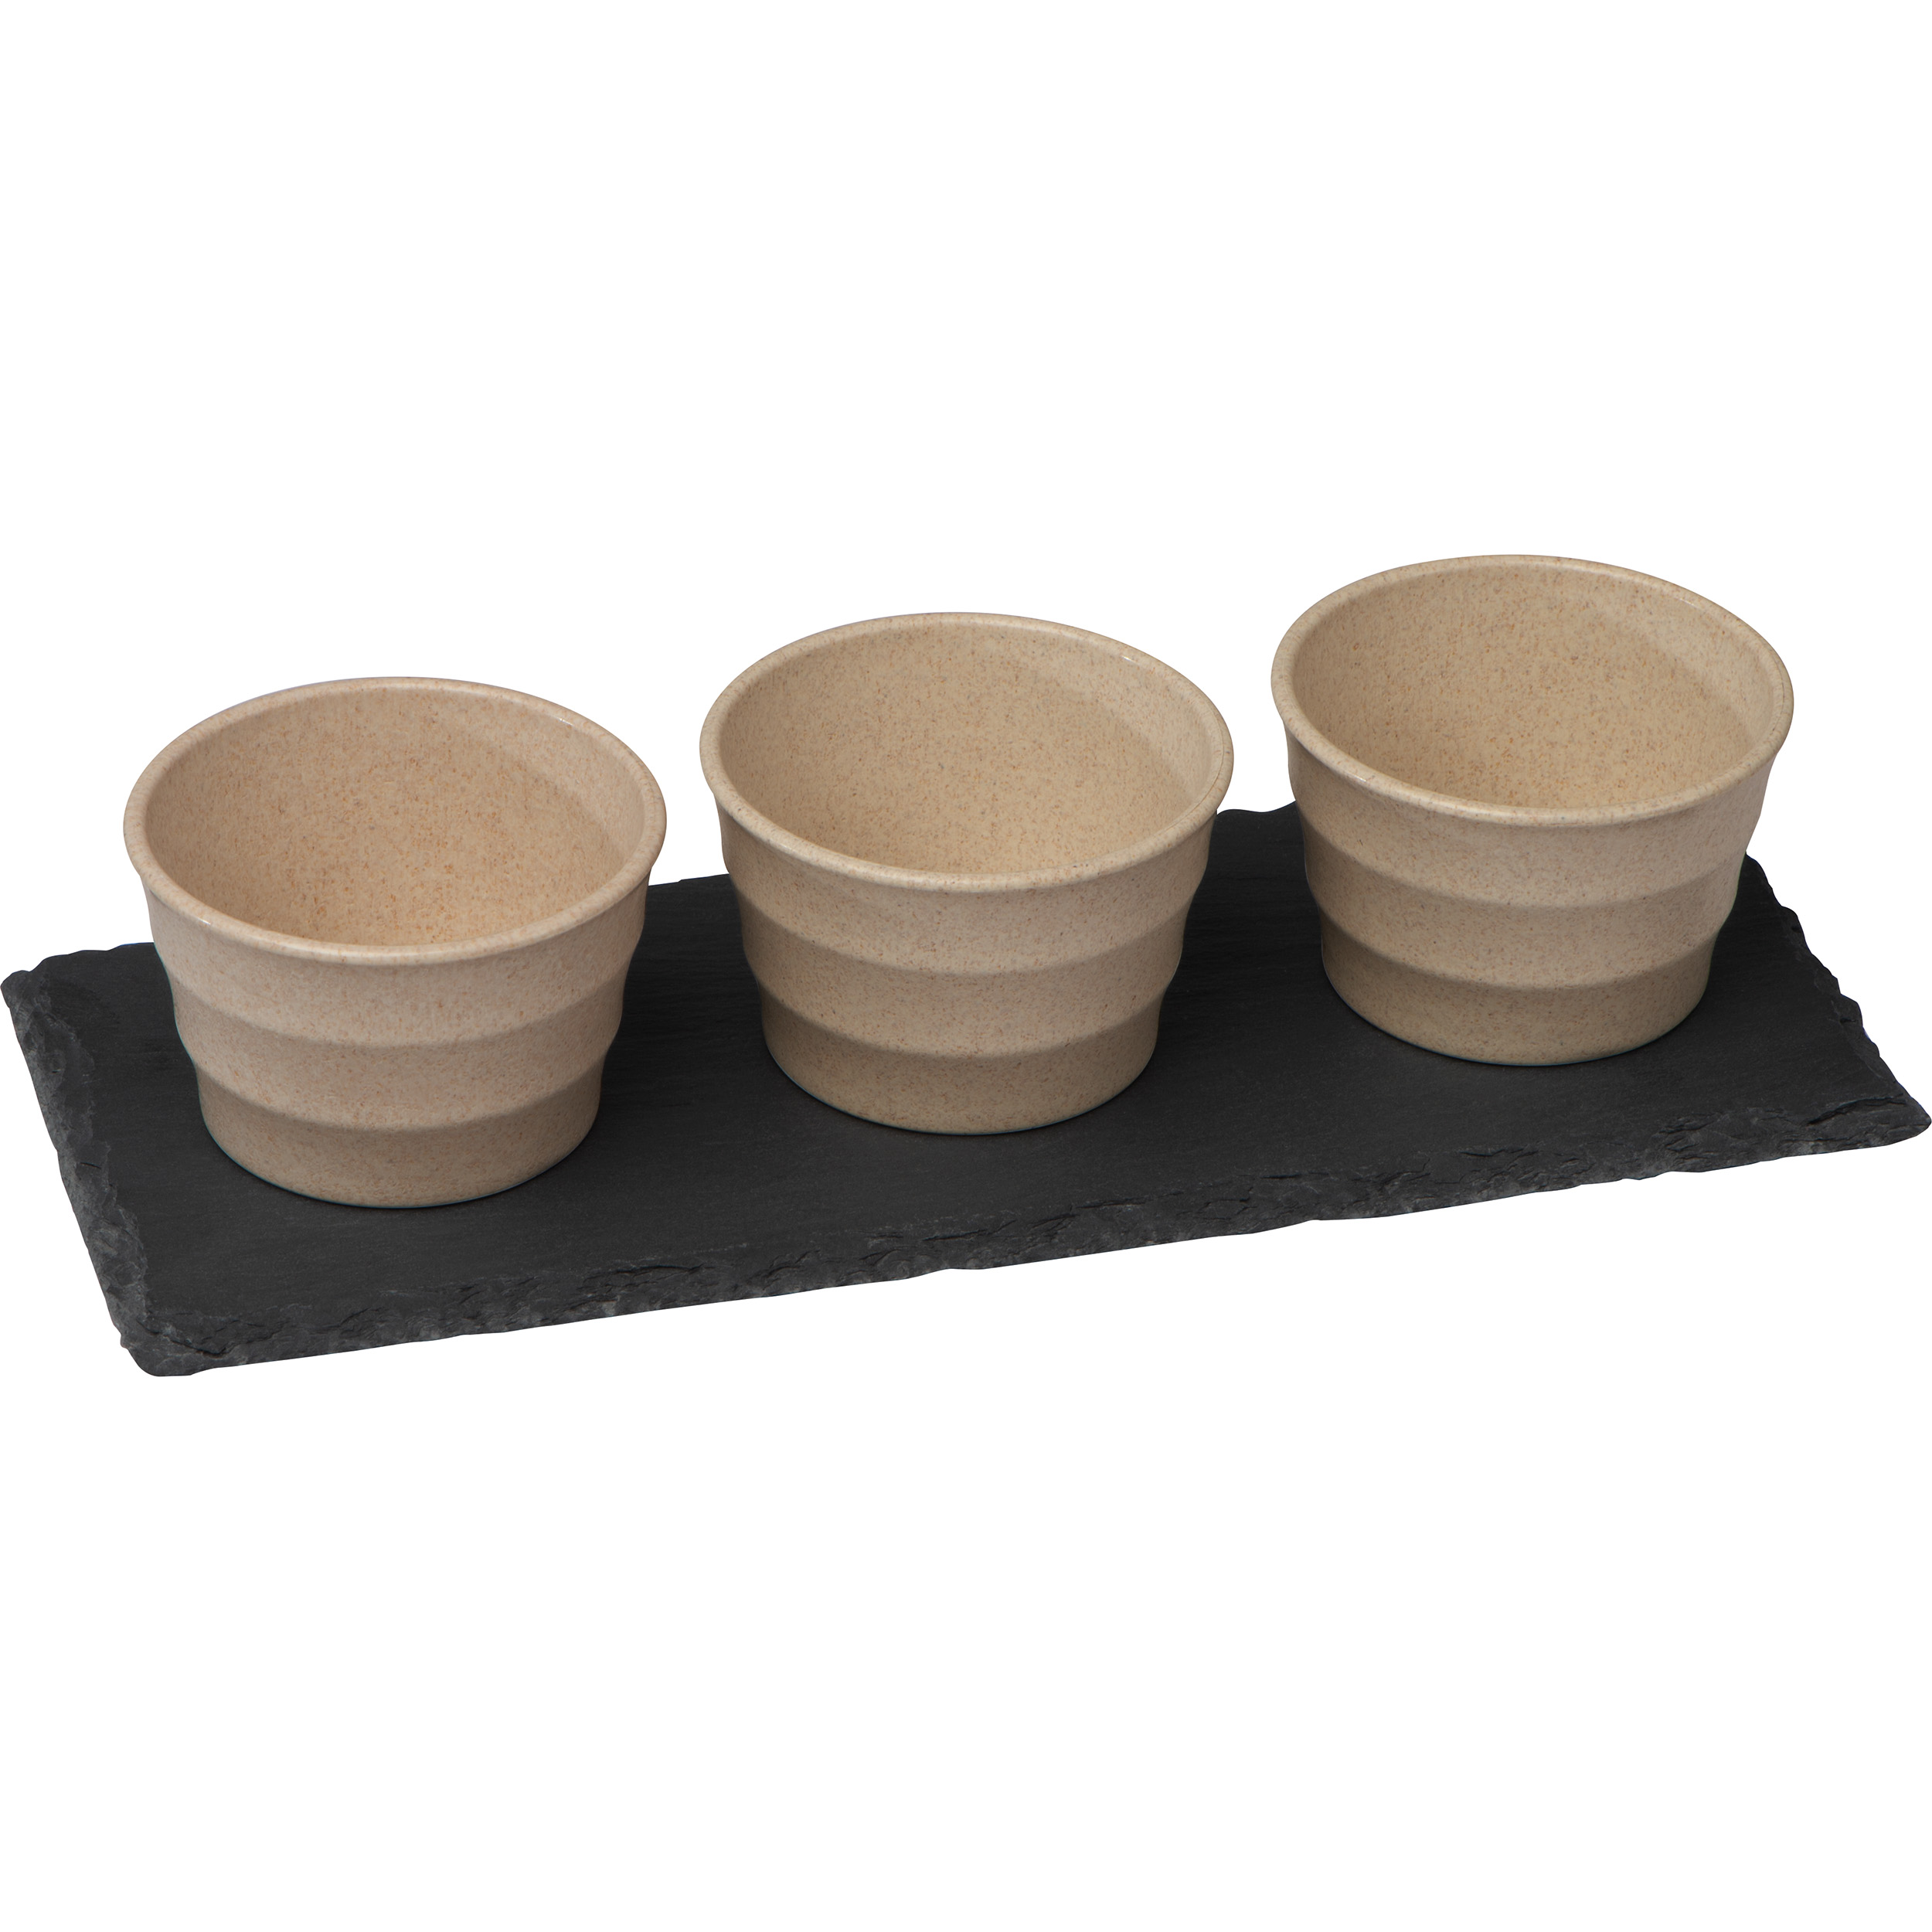 Small bowls set with slate board